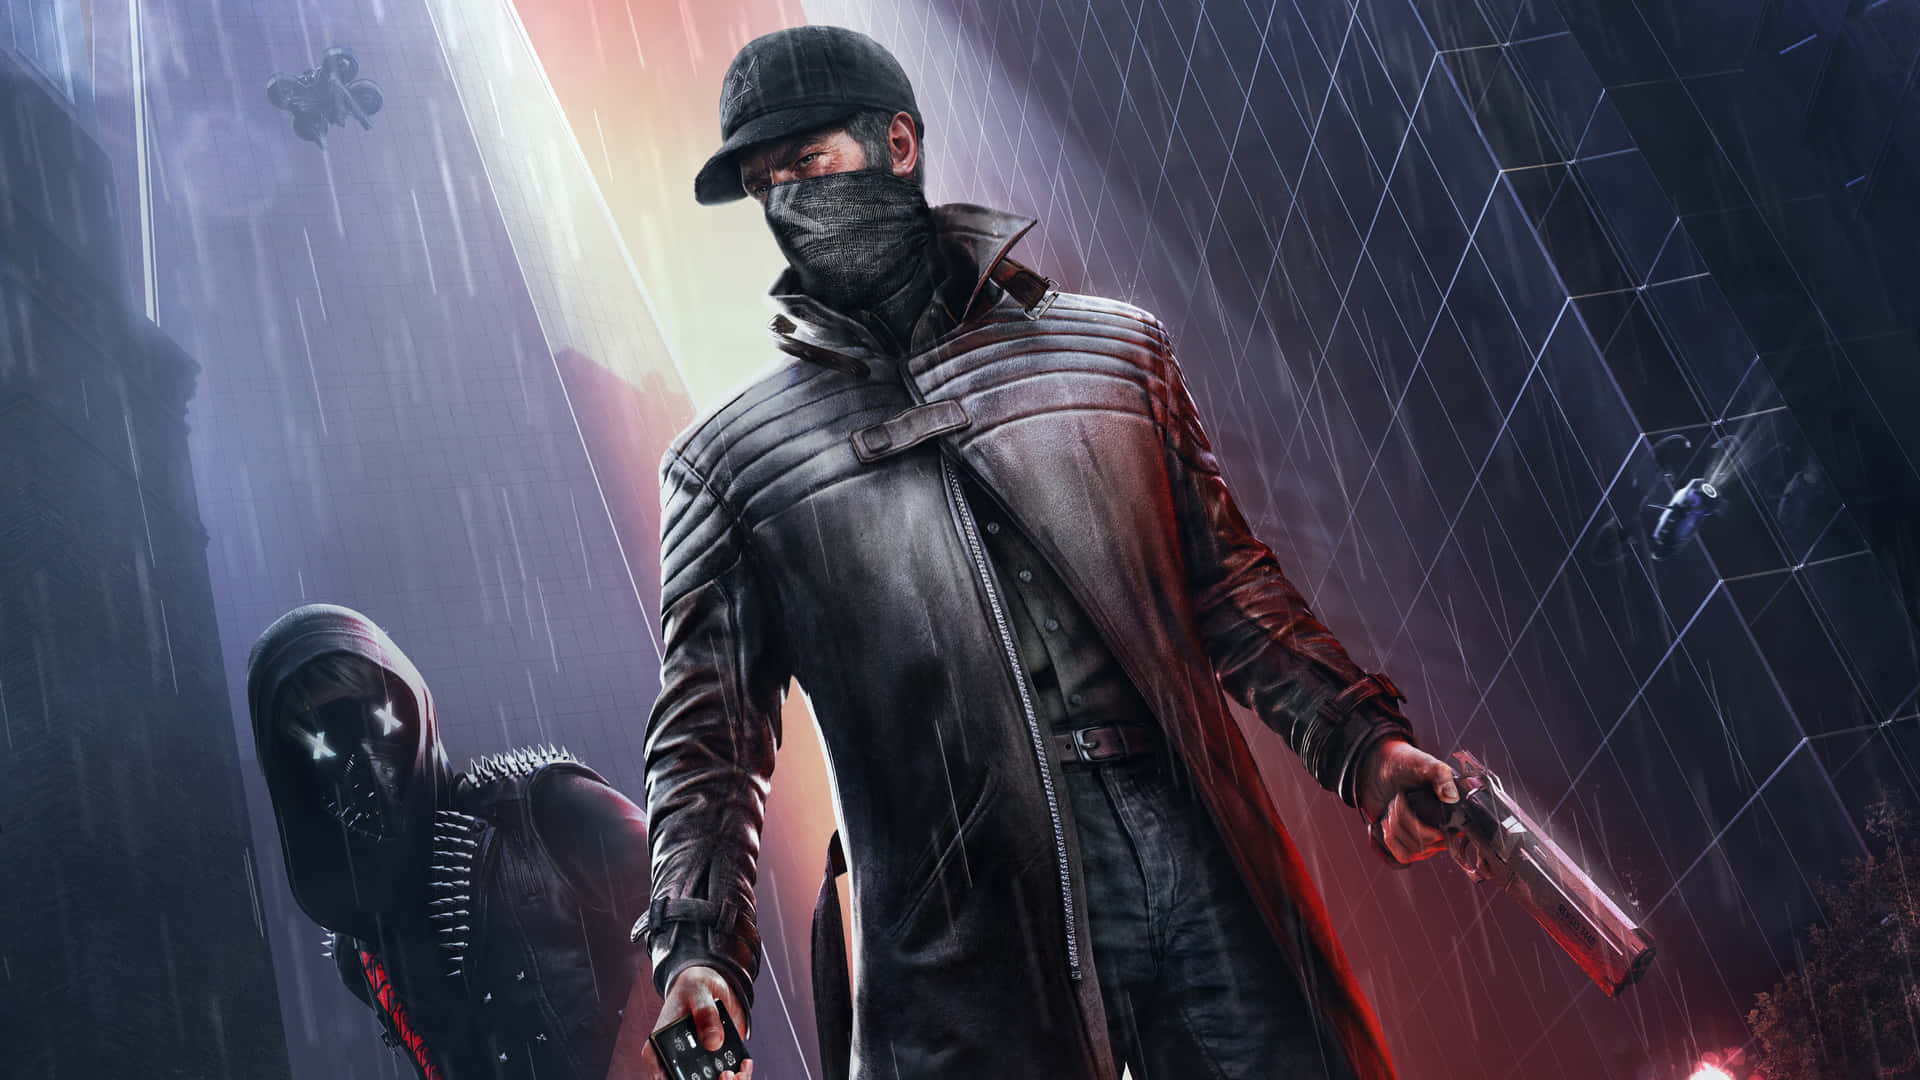 A Watch Dogs themed illustration of a man in a hoodie and mask with a city skyline behind him Wallpaper